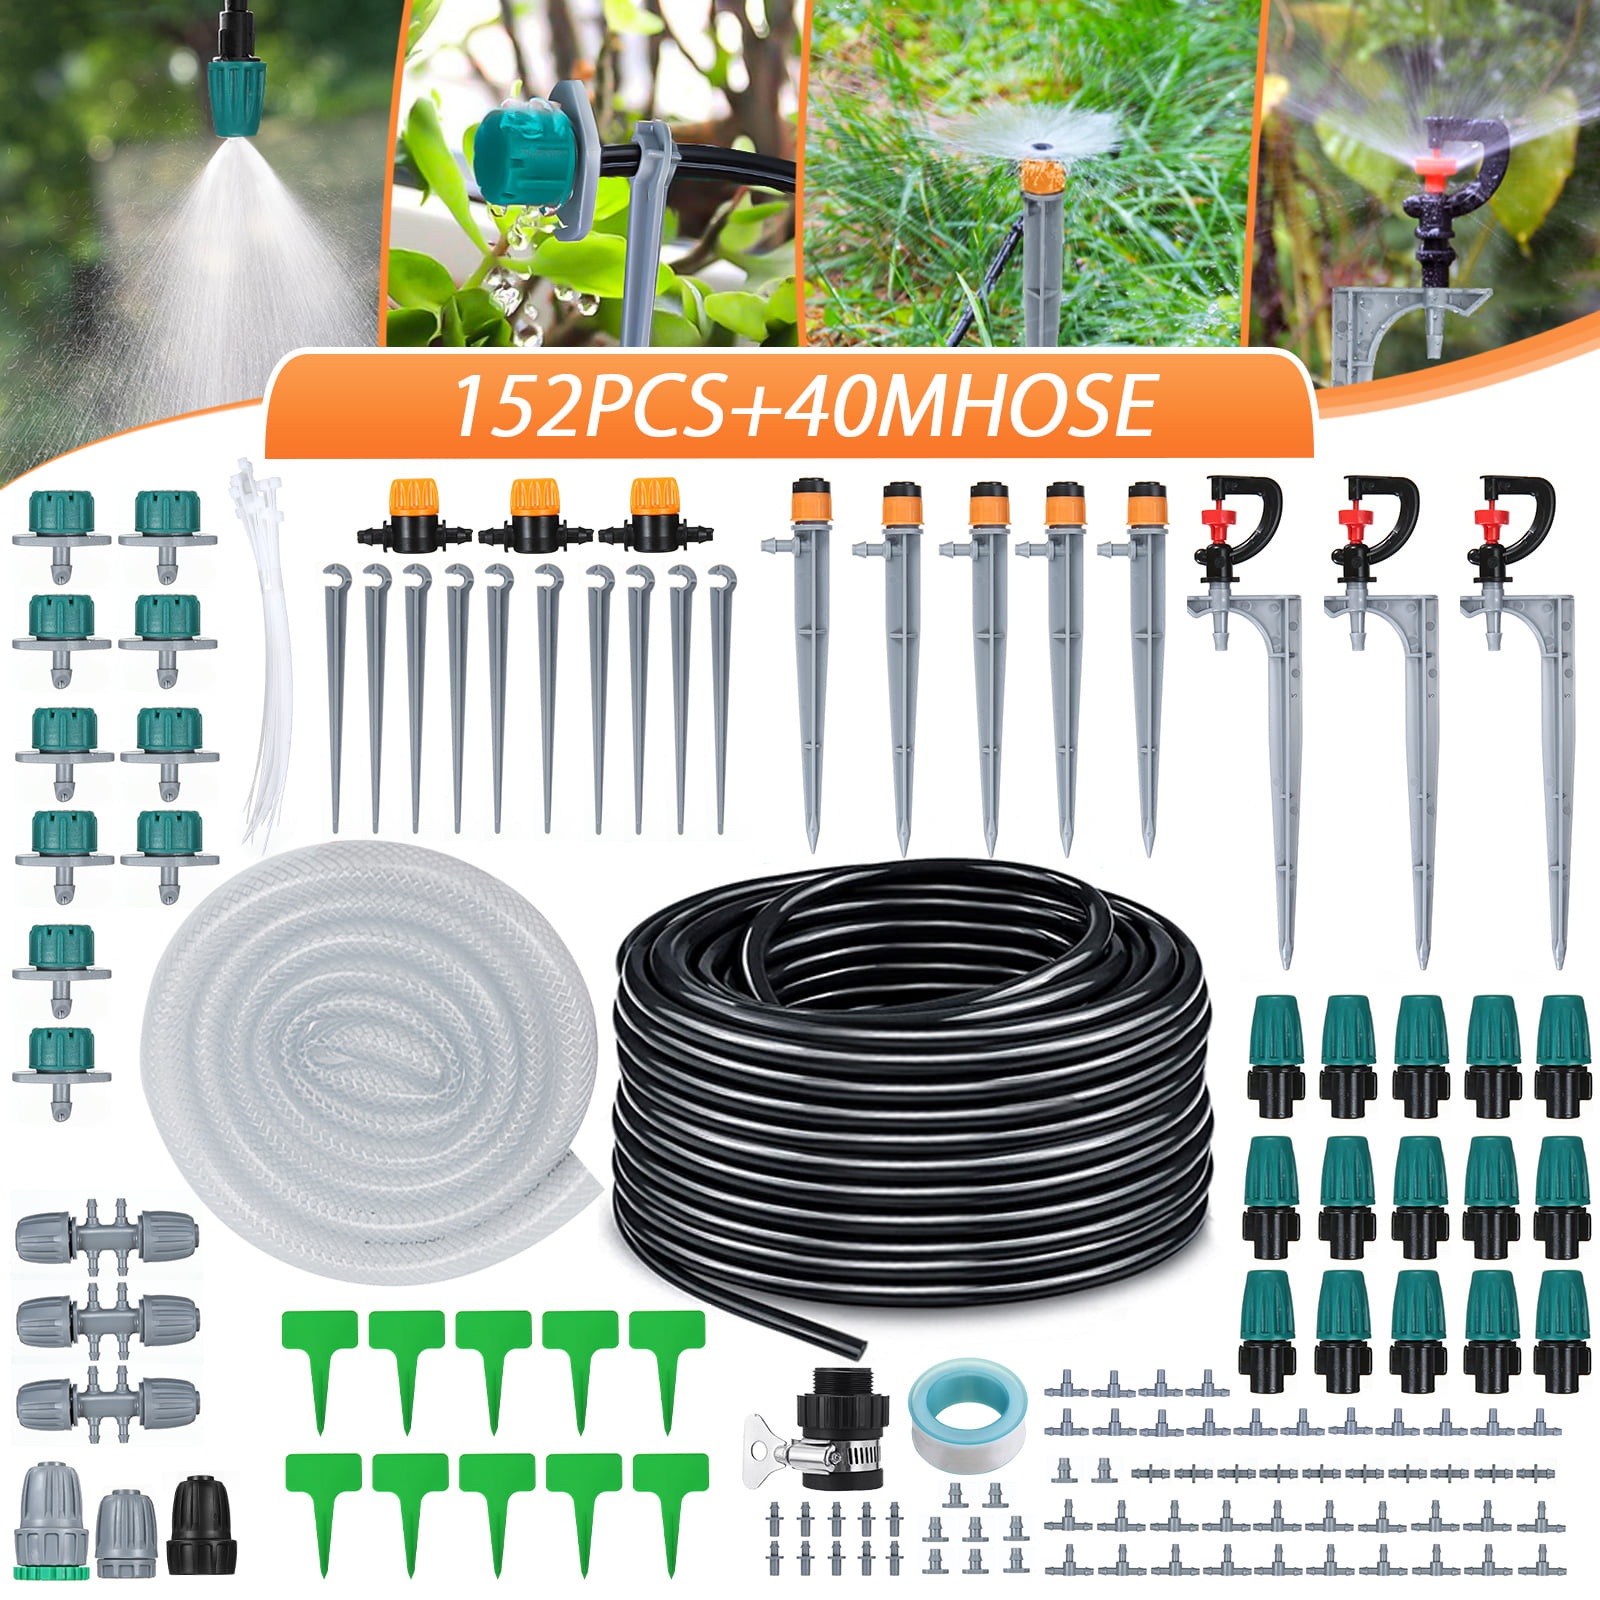 Drip Irrigation Kit 42m/138ft Garden Irrigation System with Adjustable Nozzle Plant Garden Hose Water Sprinkler & Automatic Garden Watering System Kit Misting Cooling System for Garden Greenhouse 